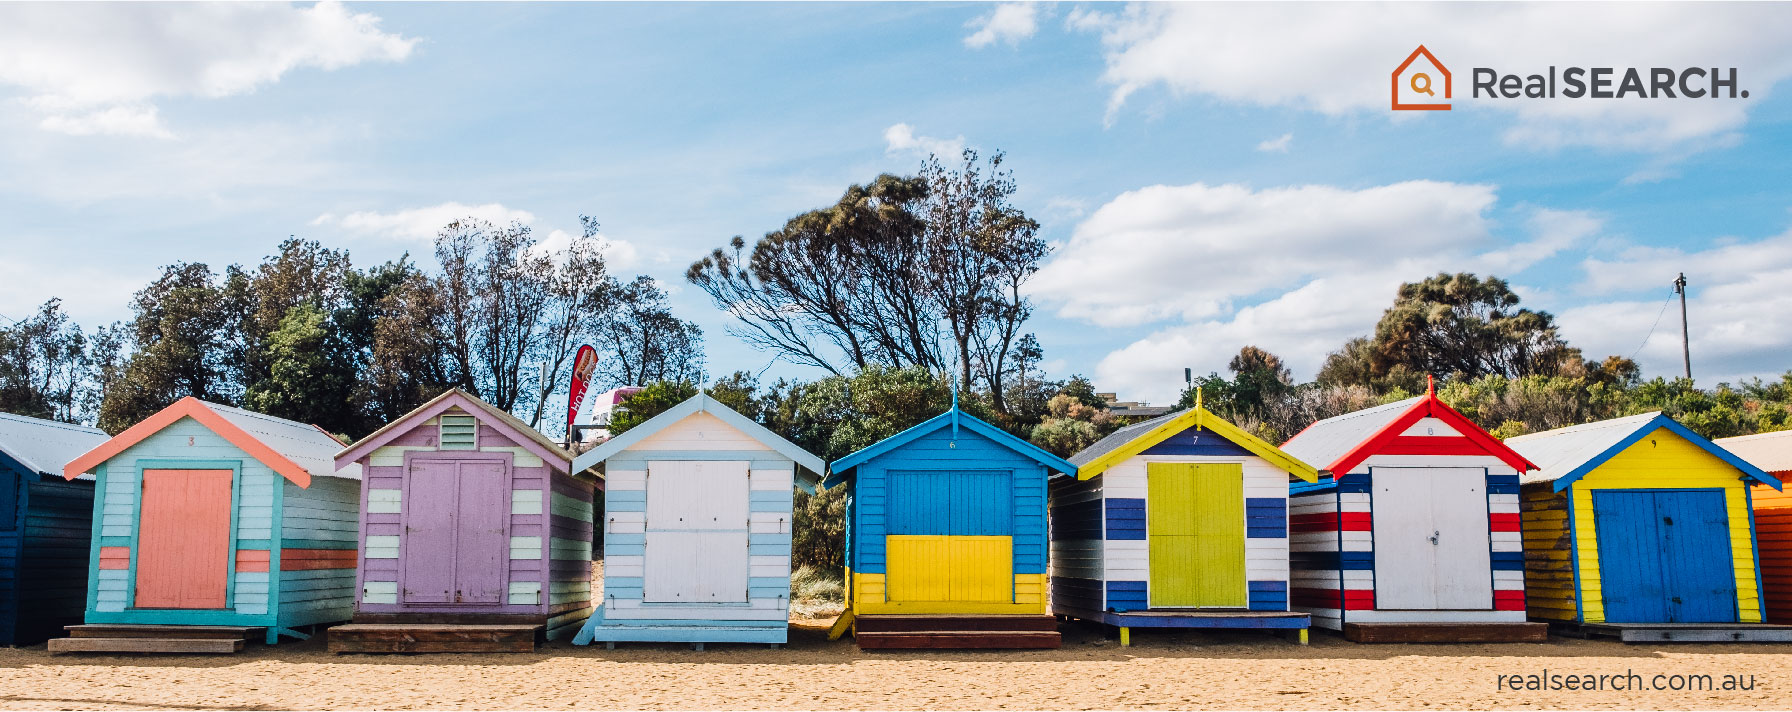 Demystifying Airbnb: How Does Airbnb Work in Australia?